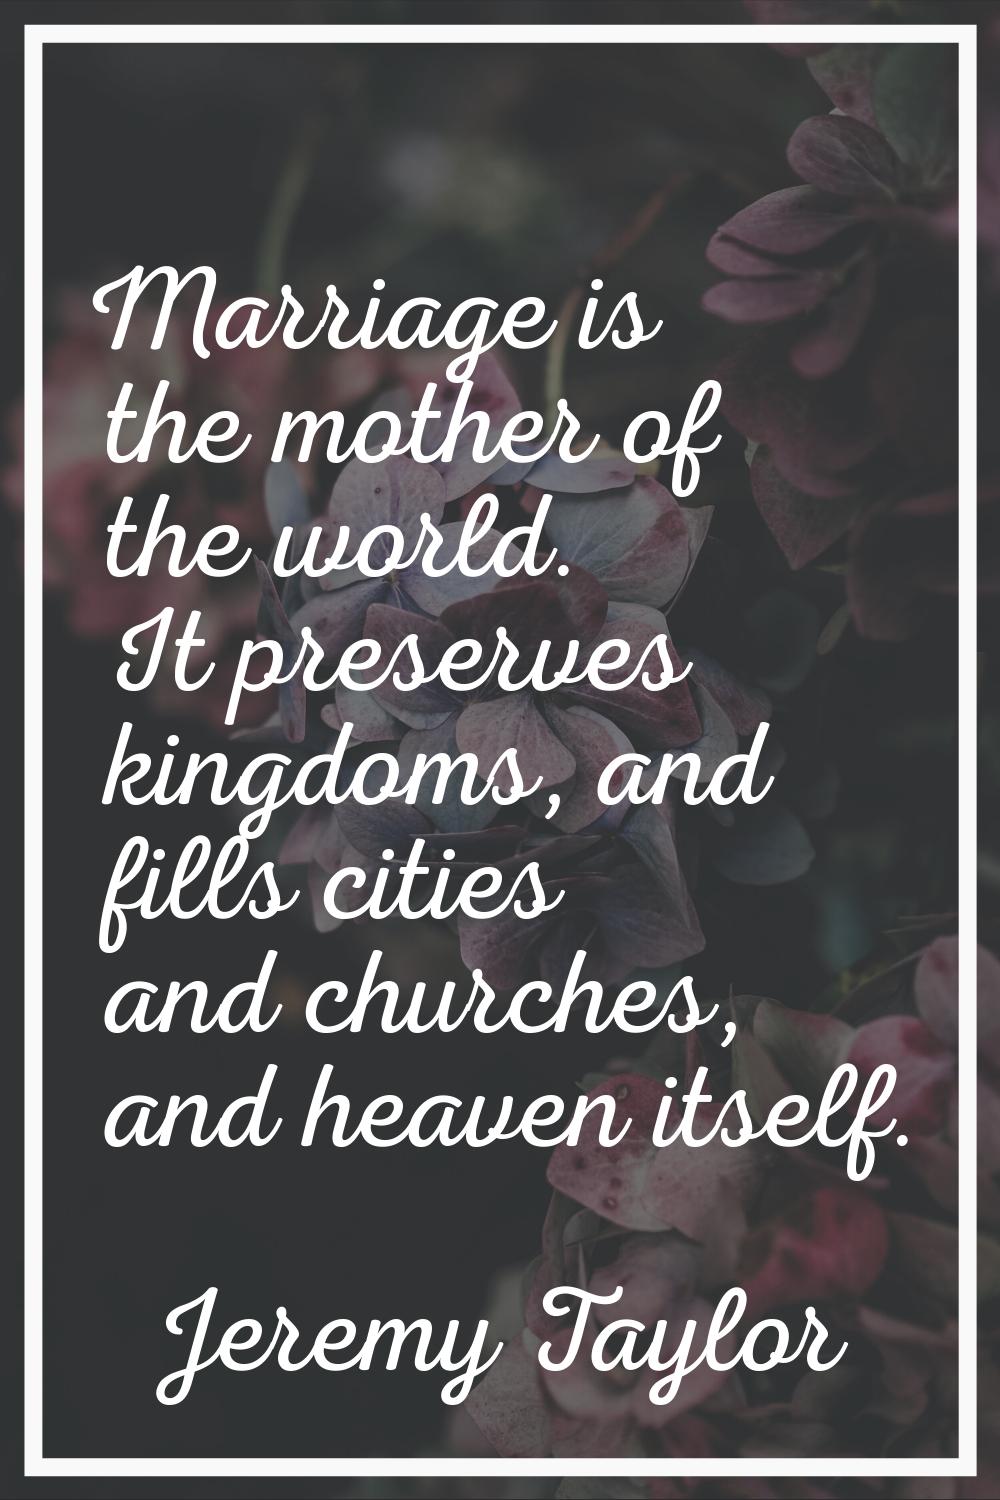 Marriage is the mother of the world. It preserves kingdoms, and fills cities and churches, and heav